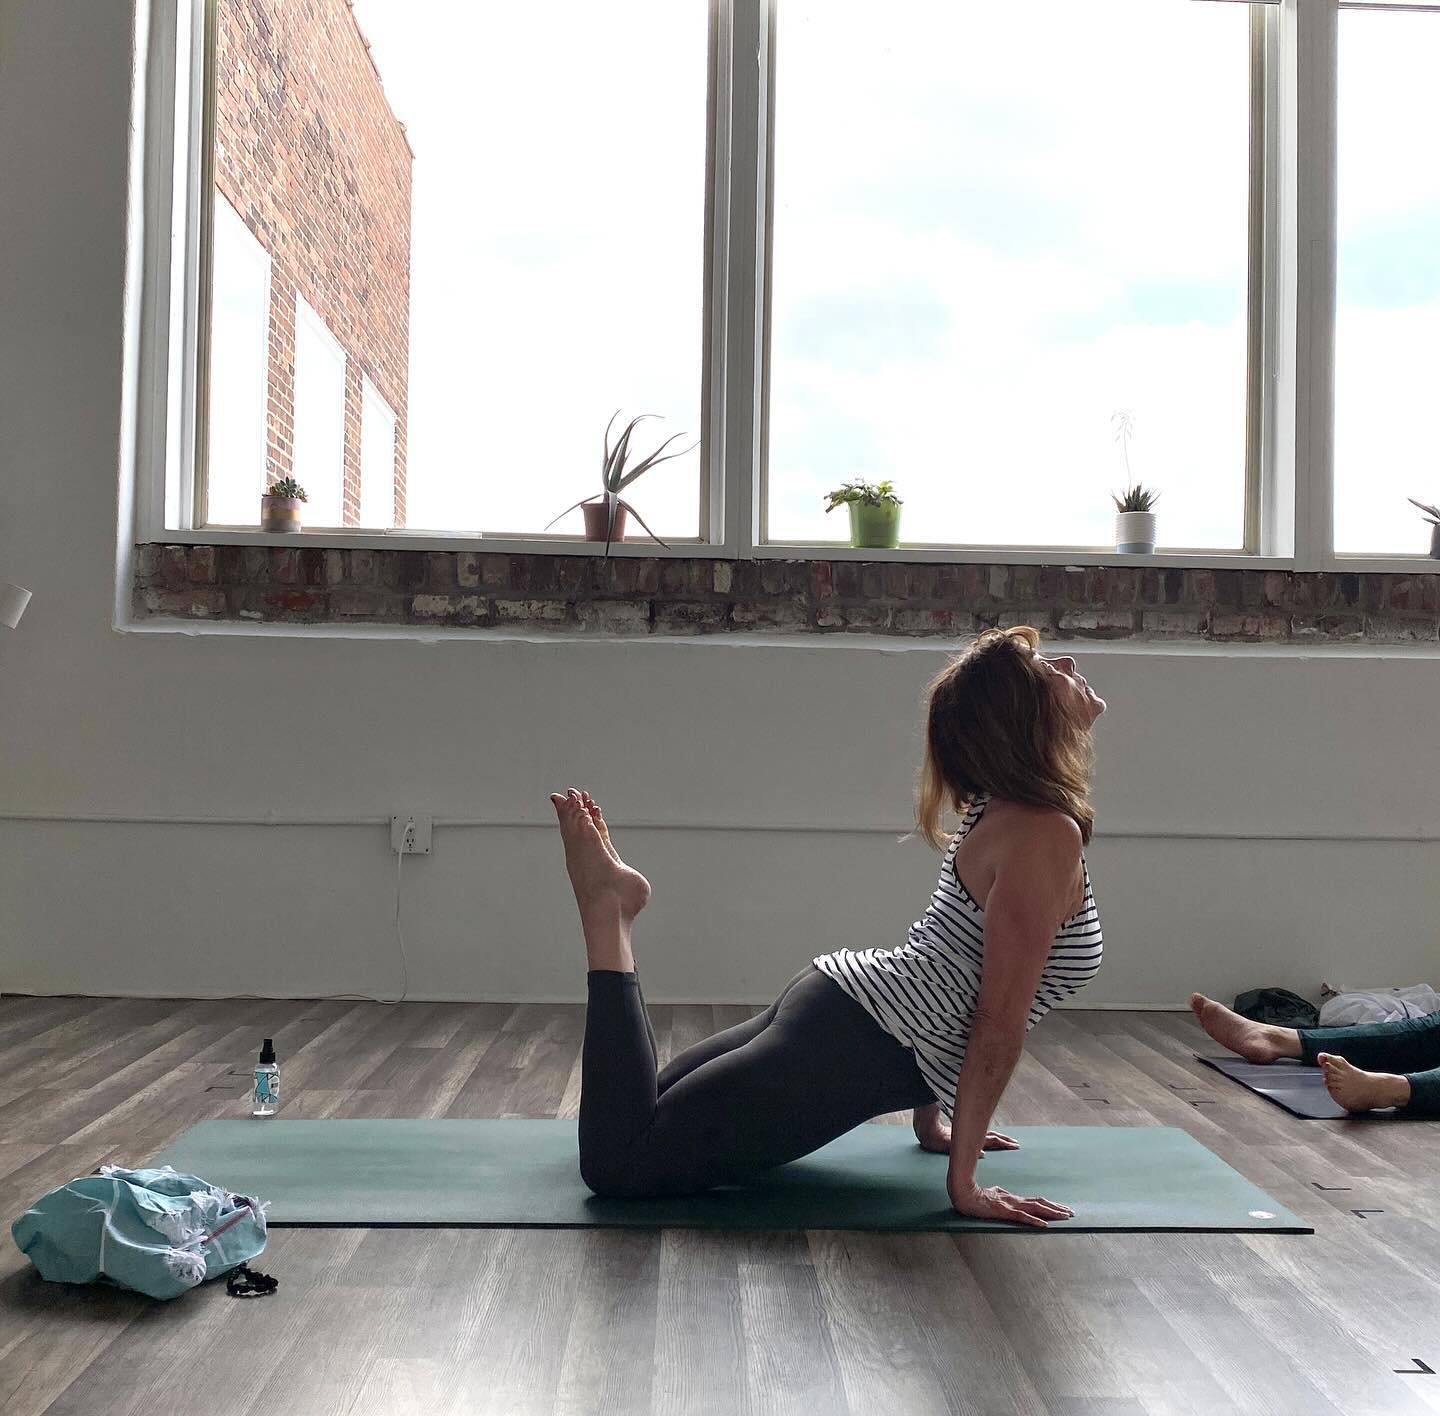 April is Alcohol Awareness Month, so we&rsquo;re participating in the @trinifoundation We Have Your Back Challenge! 

Day 5: Raja Kapotasana, or King Pigeon Pose

Join us every day for a new pose, and be sure to tag Trini to help spread the word abou